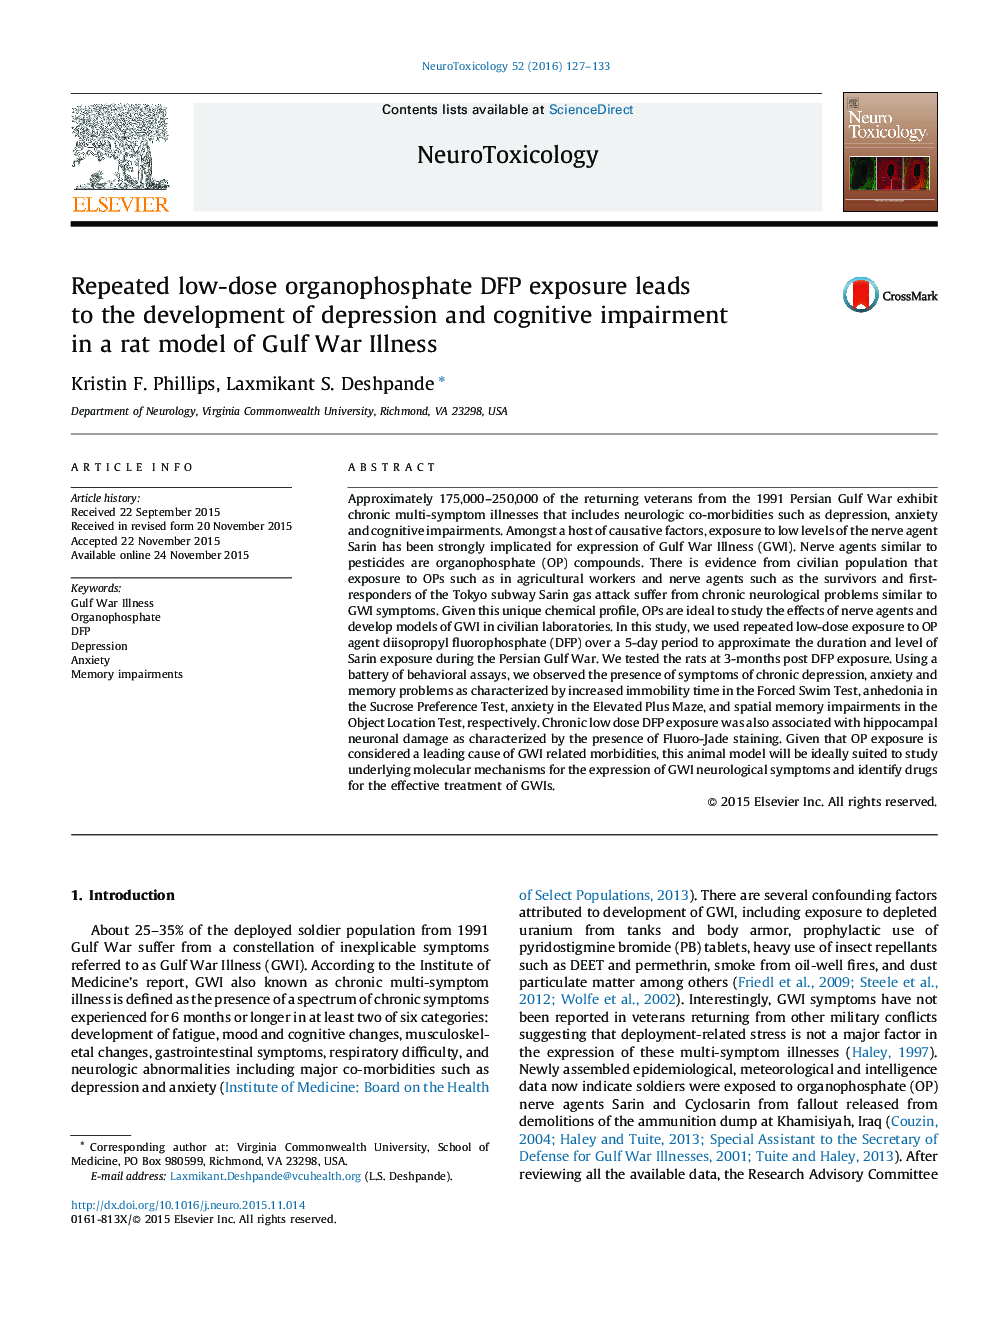 Repeated low-dose organophosphate DFP exposure leads to the development of depression and cognitive impairment in a rat model of Gulf War Illness